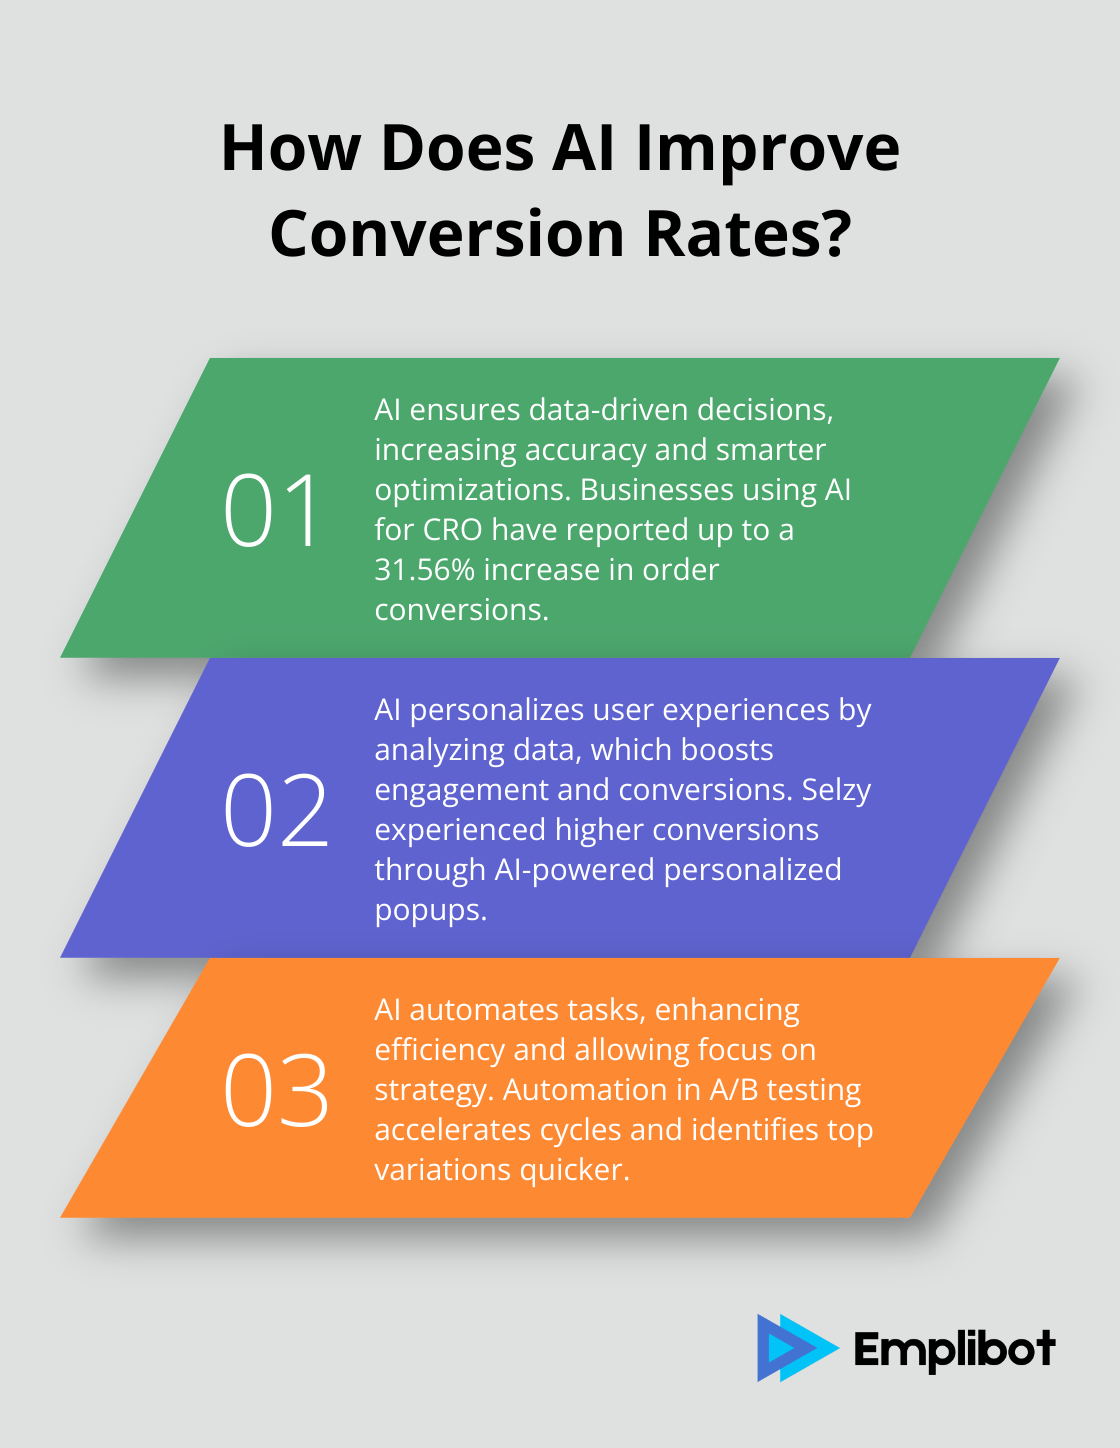 Fact - How Does AI Improve Conversion Rates?